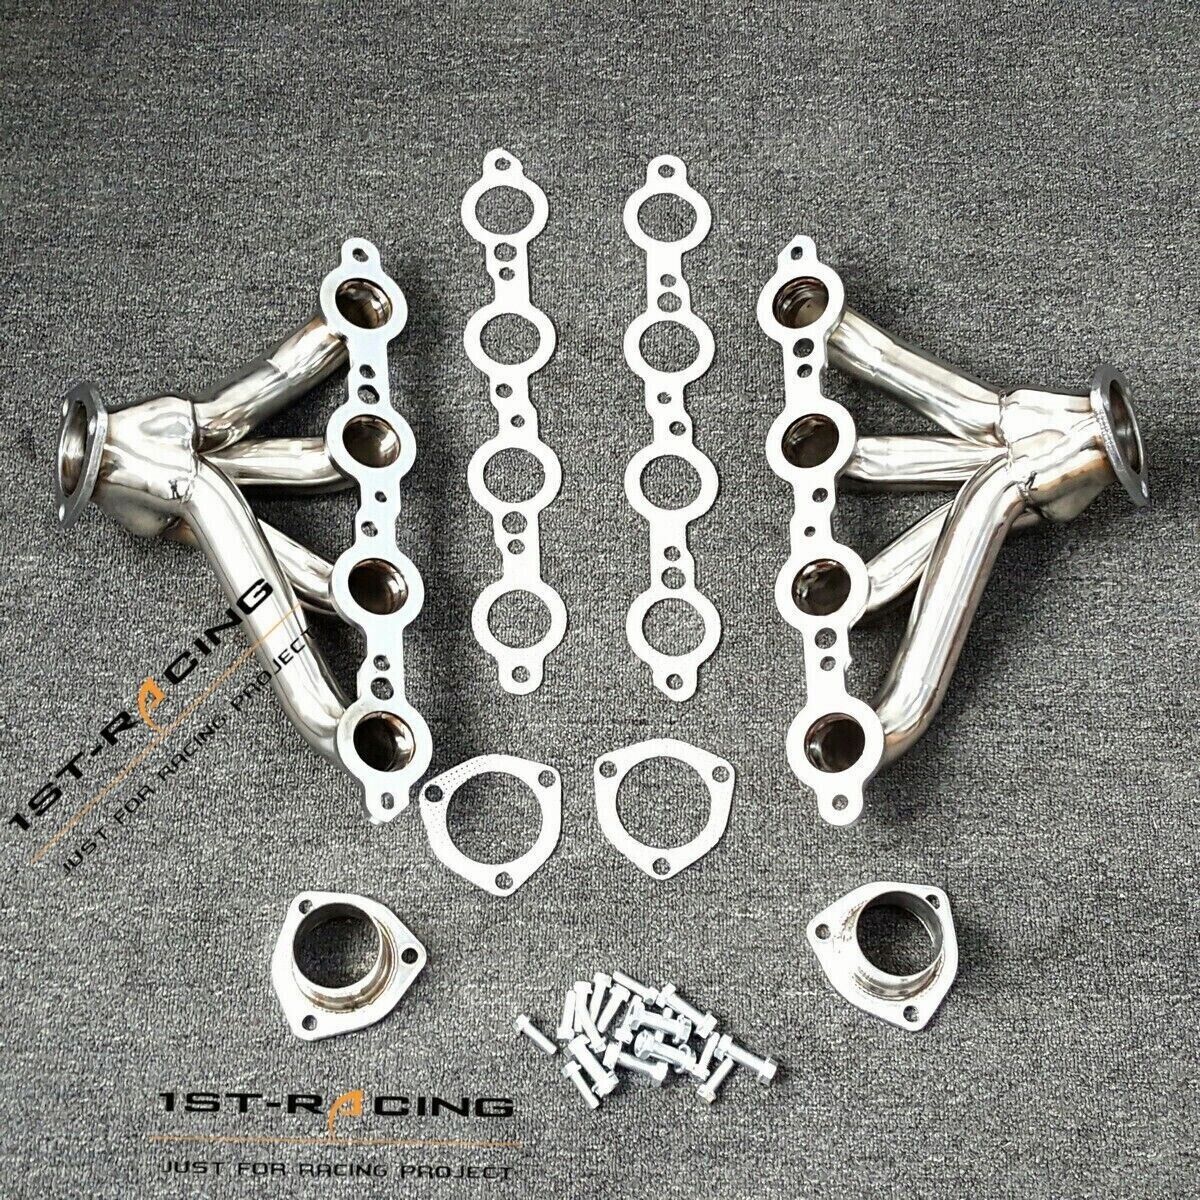 LS Swap Exhaust Headers FOR Chevrolet Impala &Biscayne Bel Air 5.3L 5.7L 1958-64